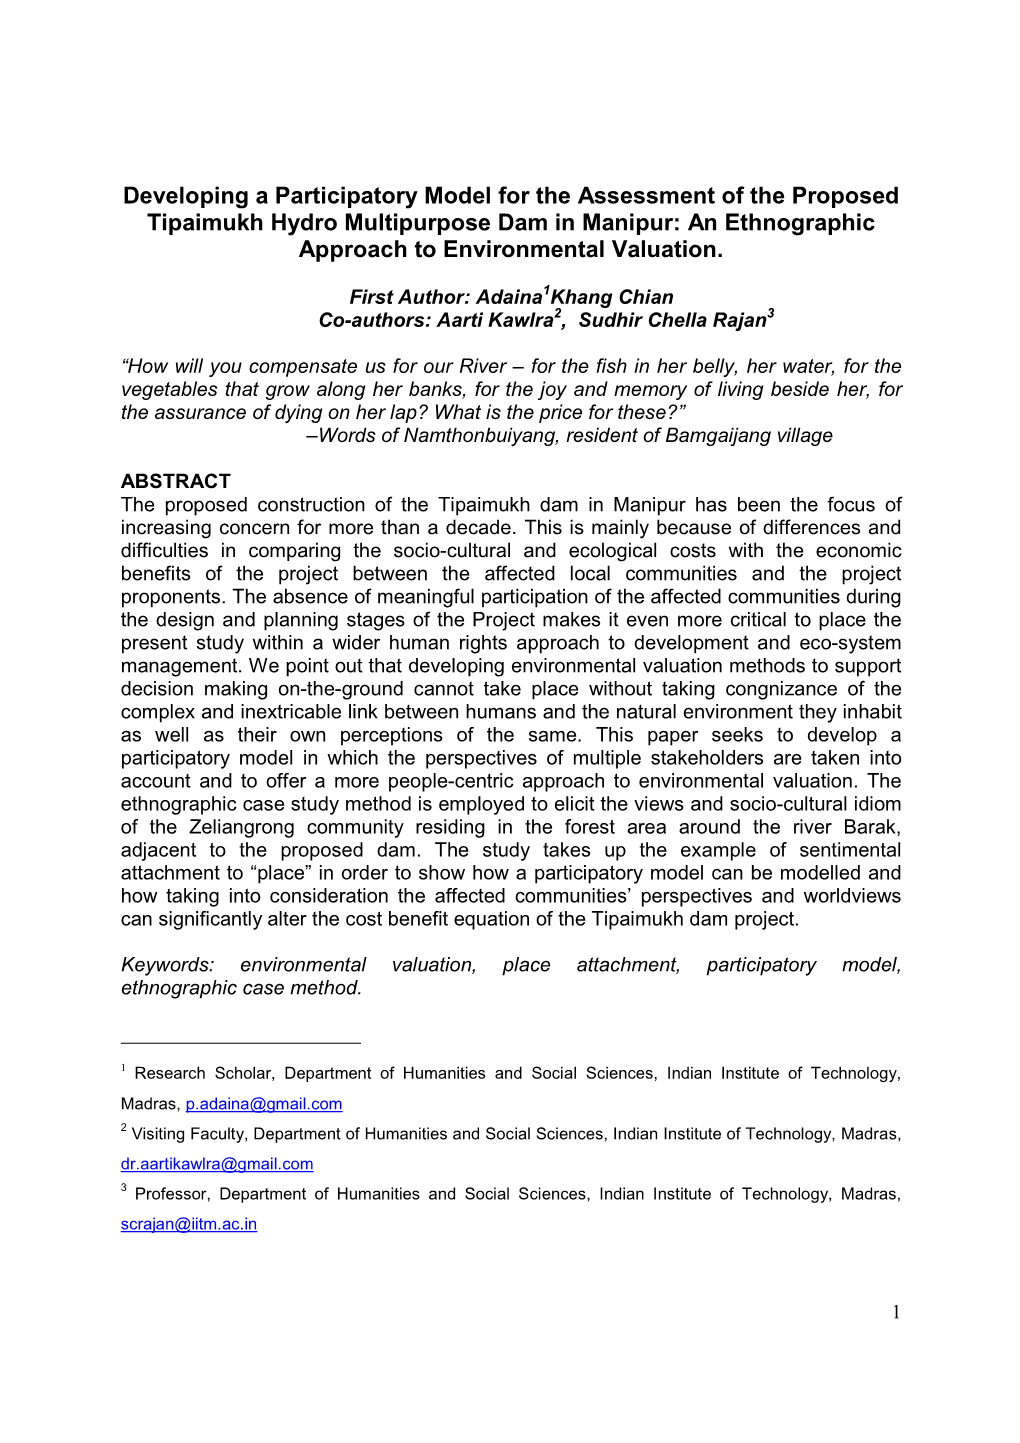 An Ethnographic Approach to Environmental Valuation